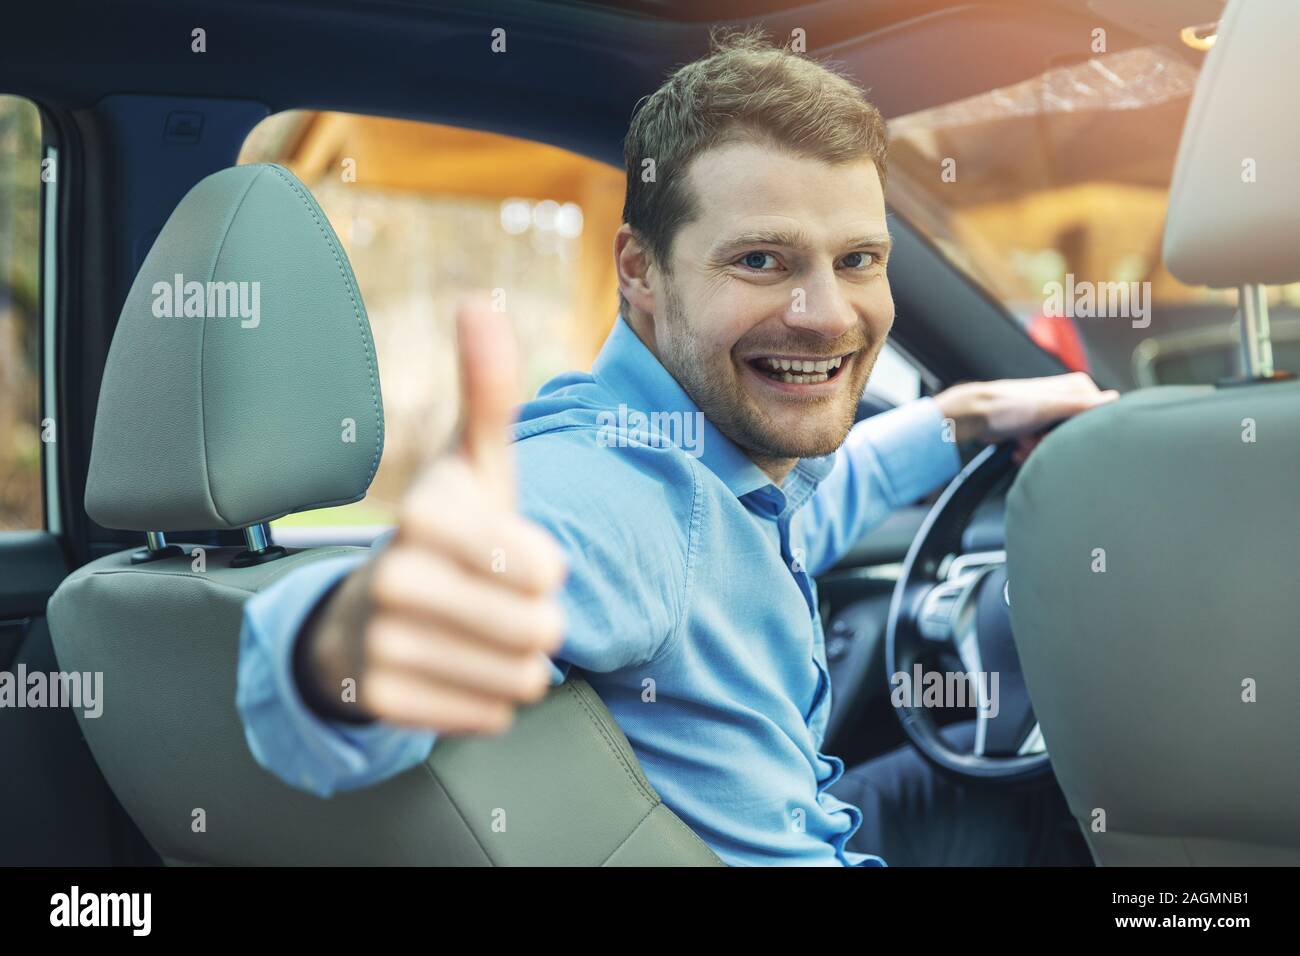 man sitting inside the car and showing thumb up gesture Stock Photo